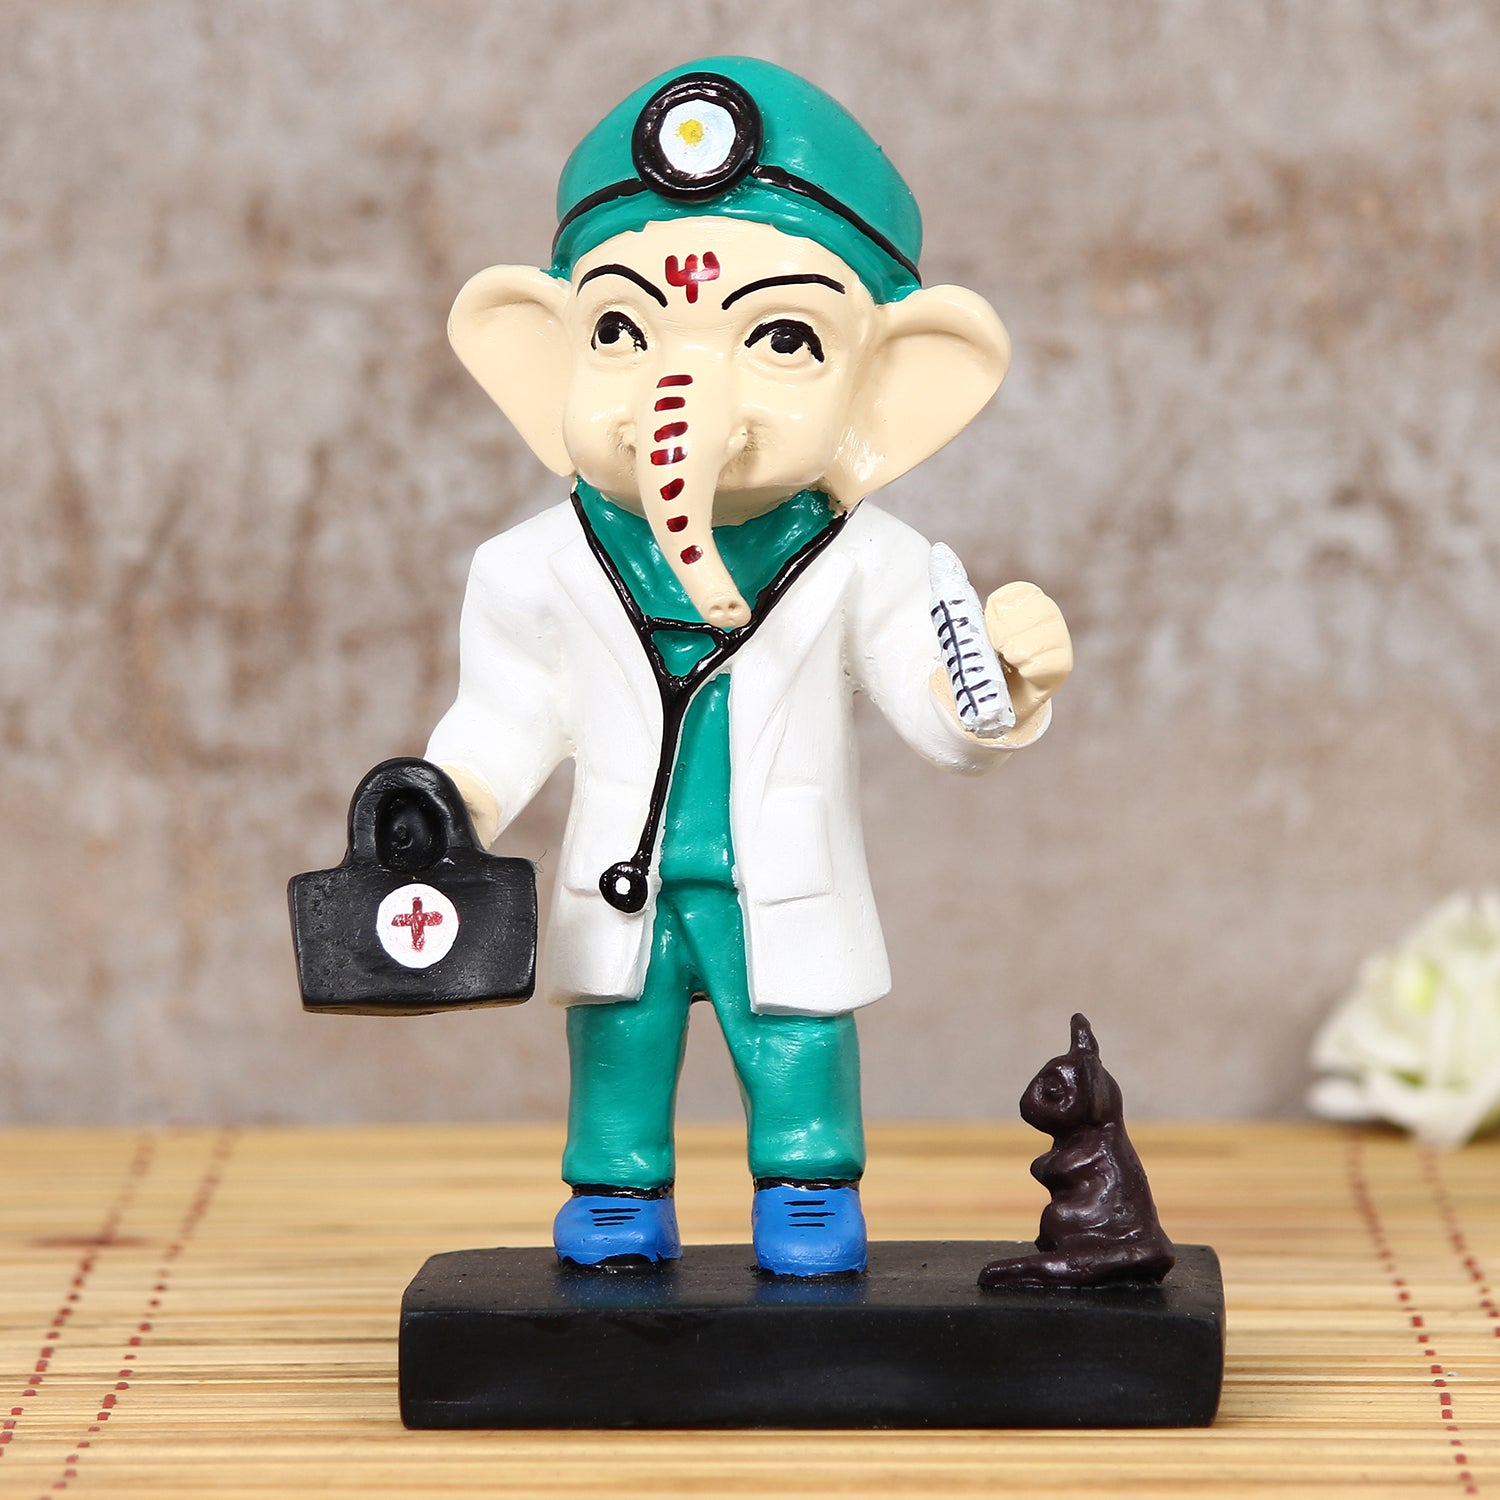 Polyresin Decorative Lord Ganesha Idol in Doctor Avatar (Green, White, Black and Blue) 1